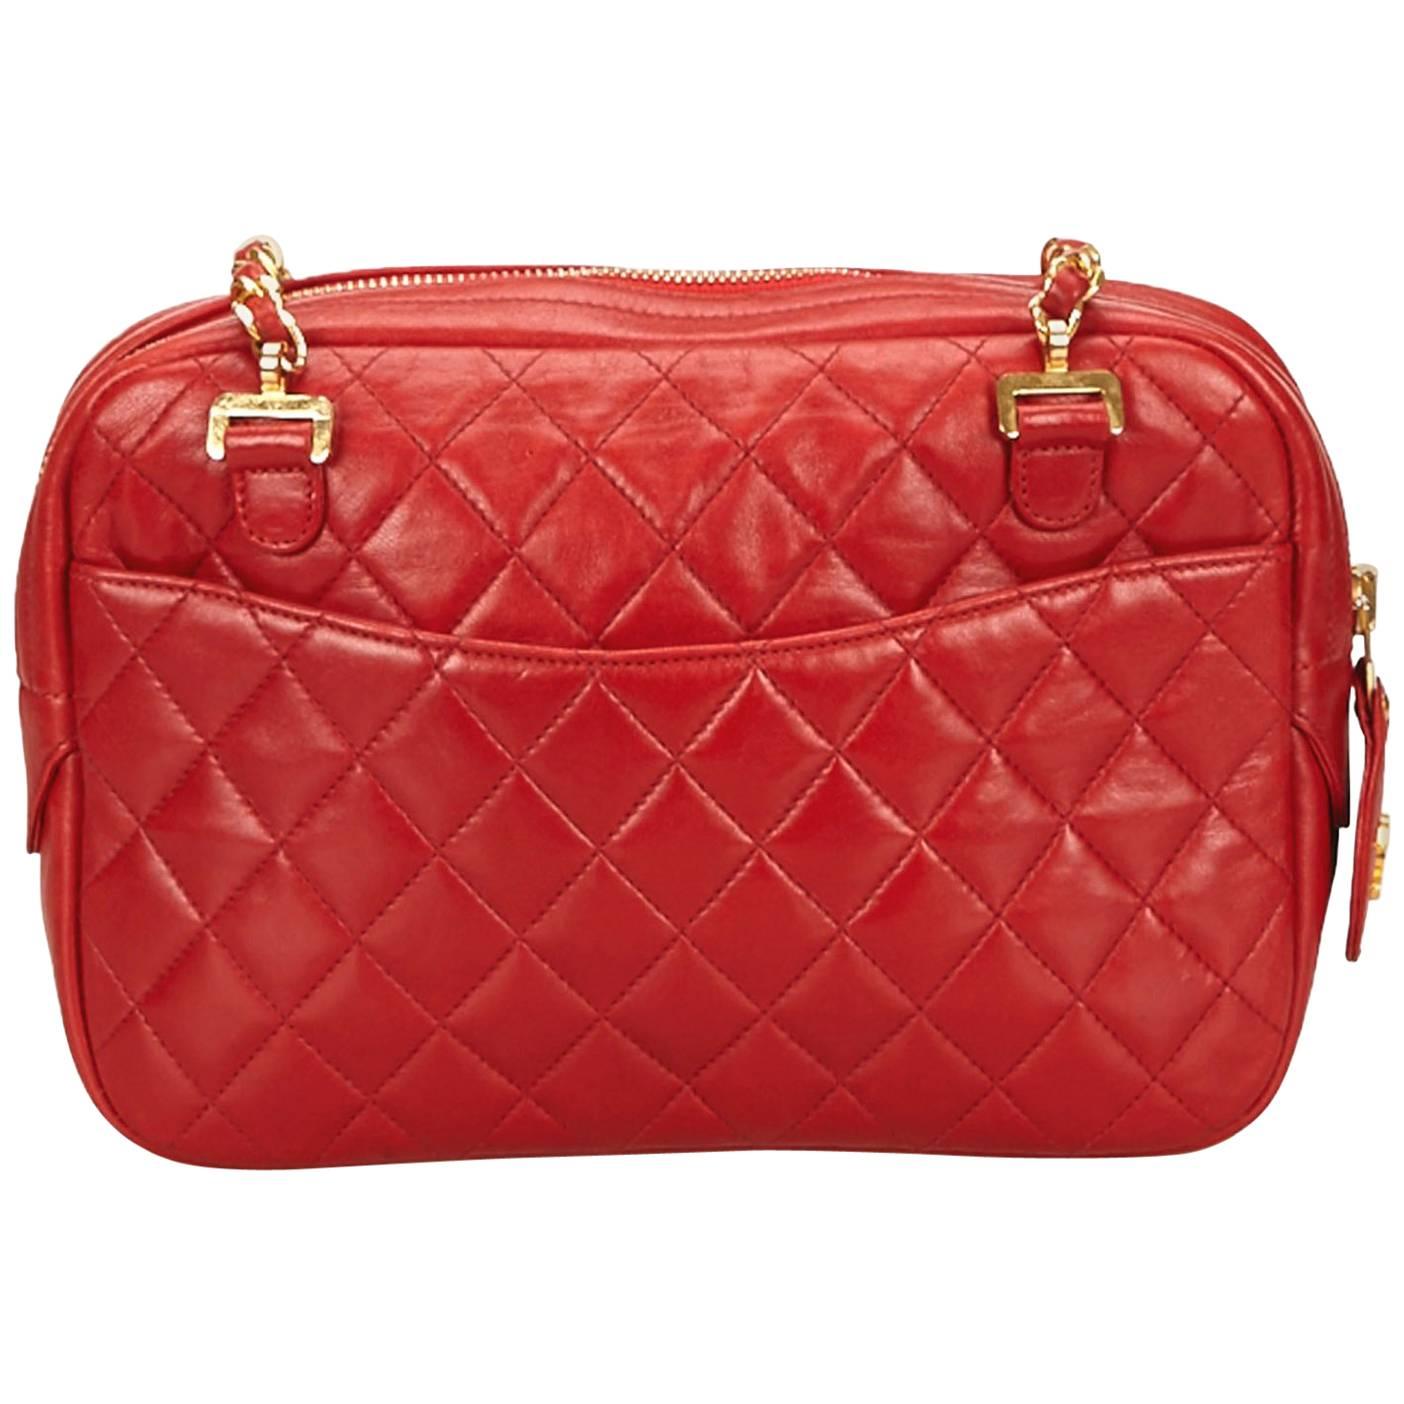 Red Chanel Quilted Lambskin Shoulder Bag